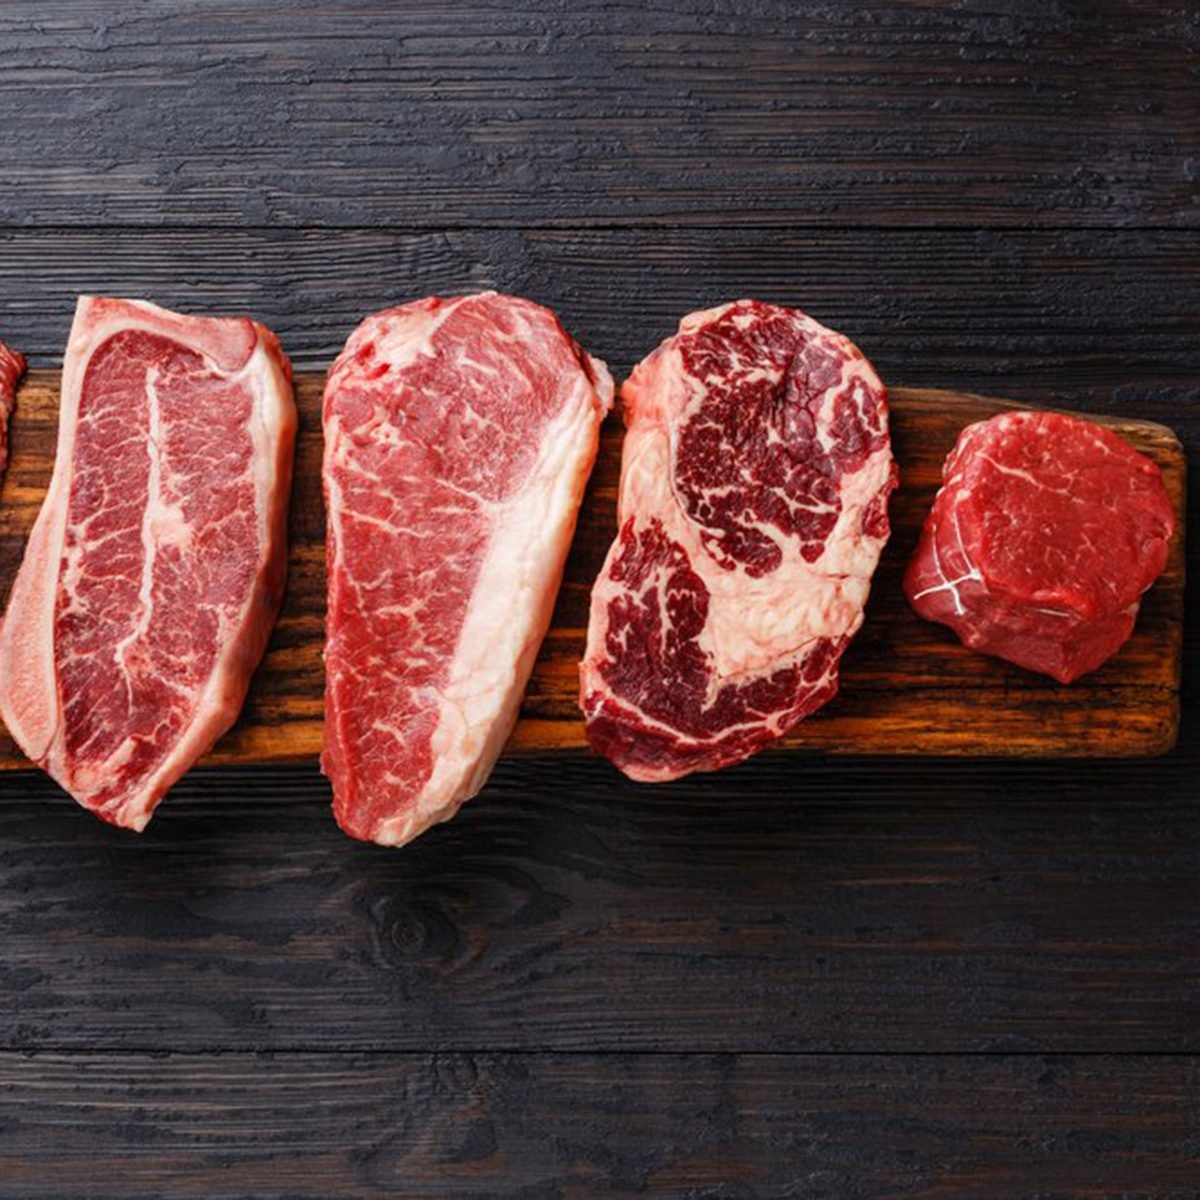 Grass Fed vs Corn Fed Beef: What's the Difference?